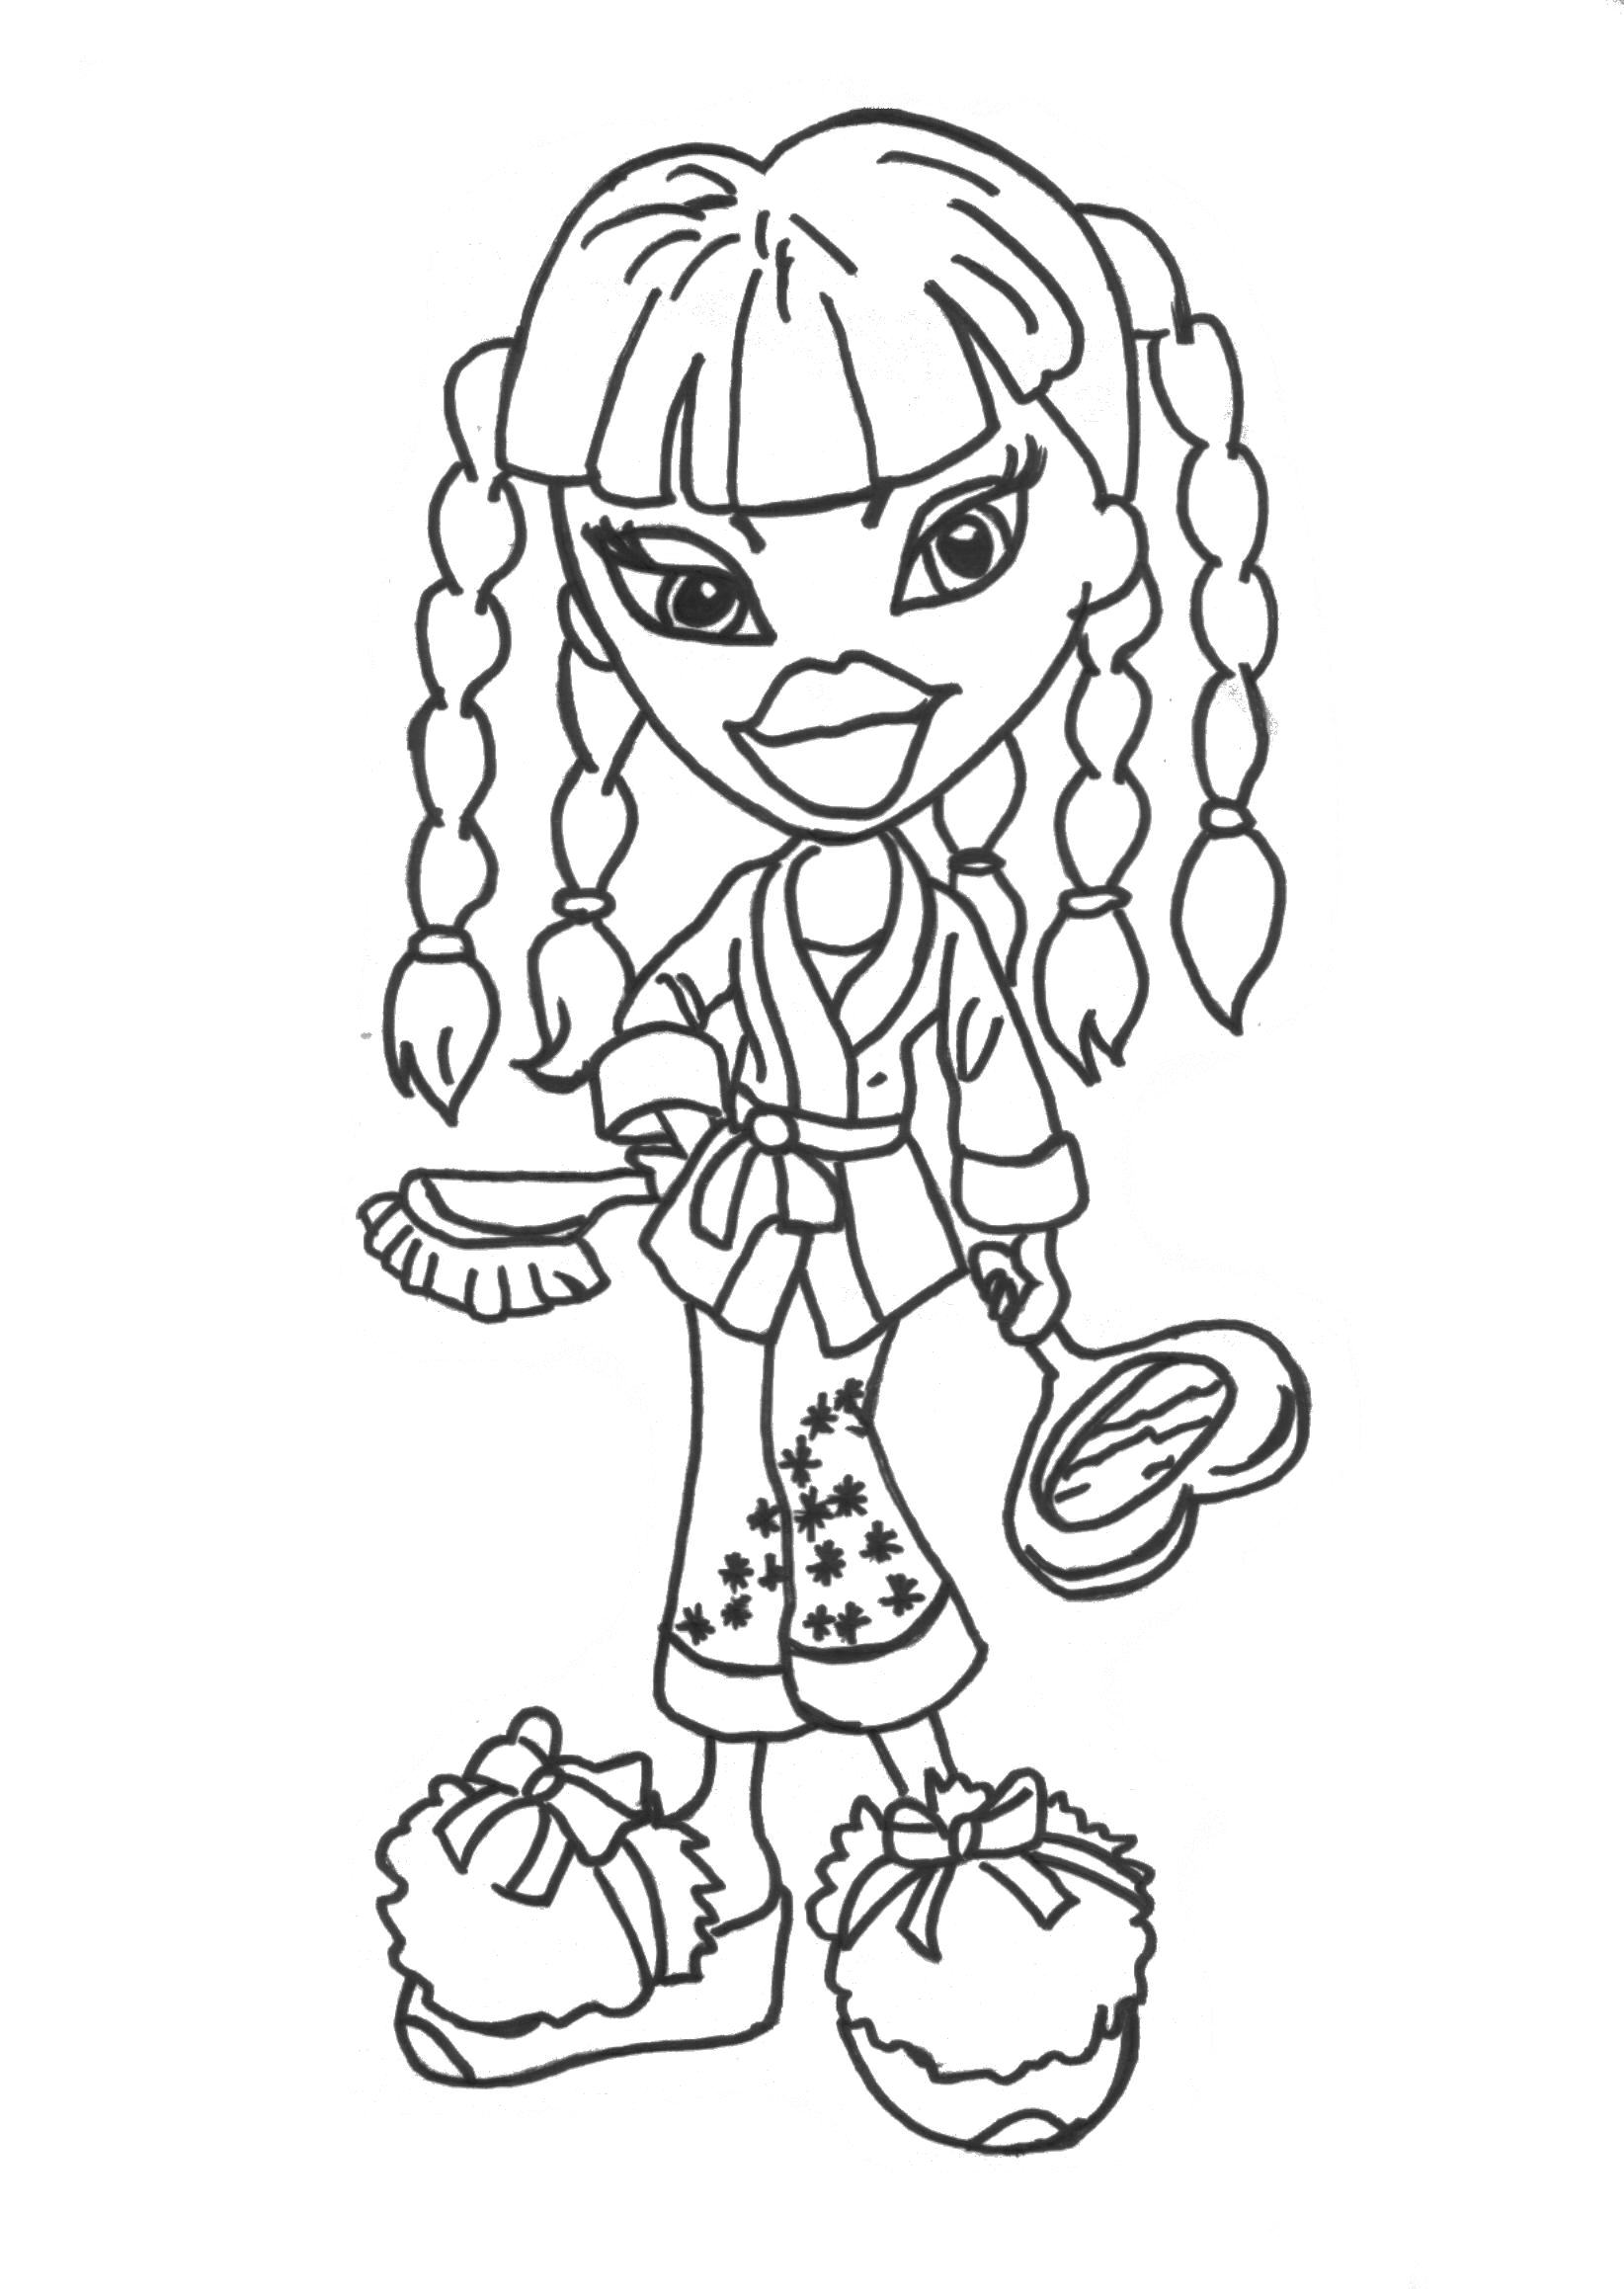 ▷ Bratz: Coloring Pages & Books - 100% FREE and printable!